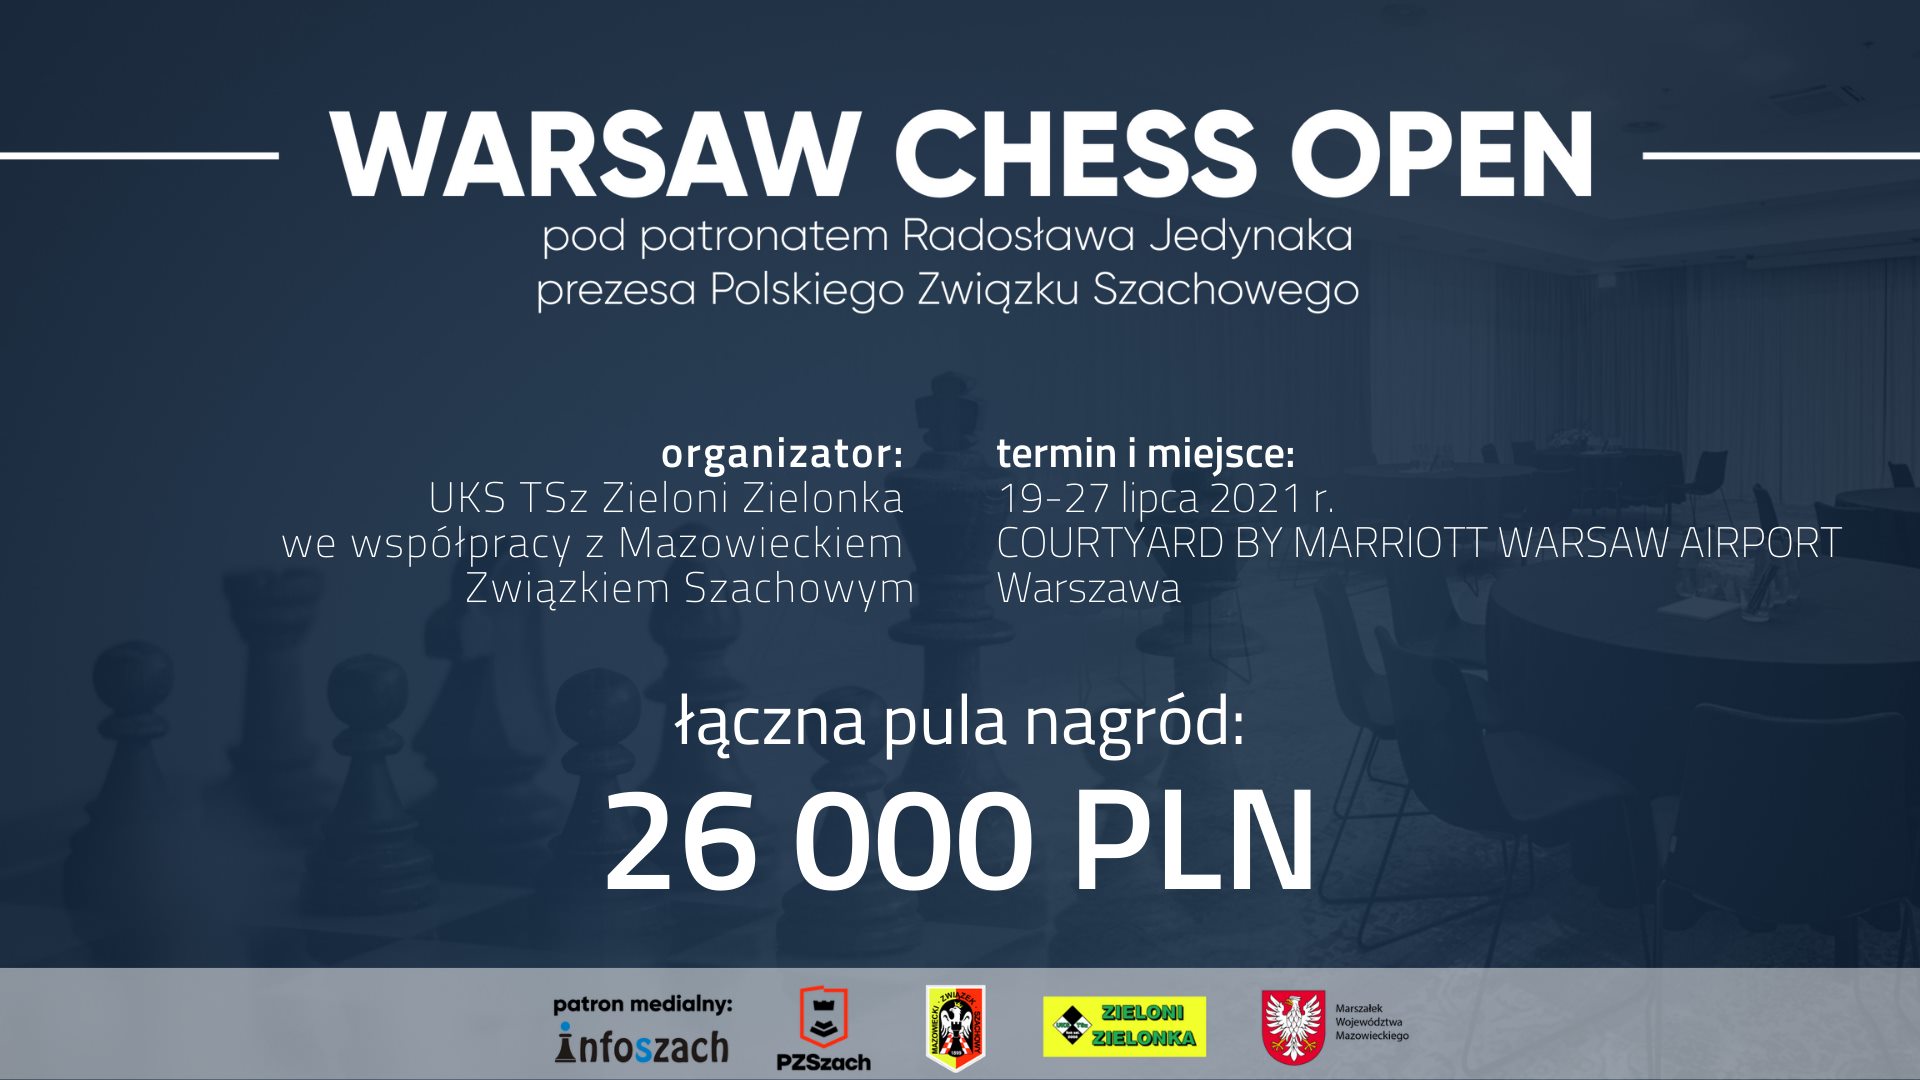 warsaw chess open